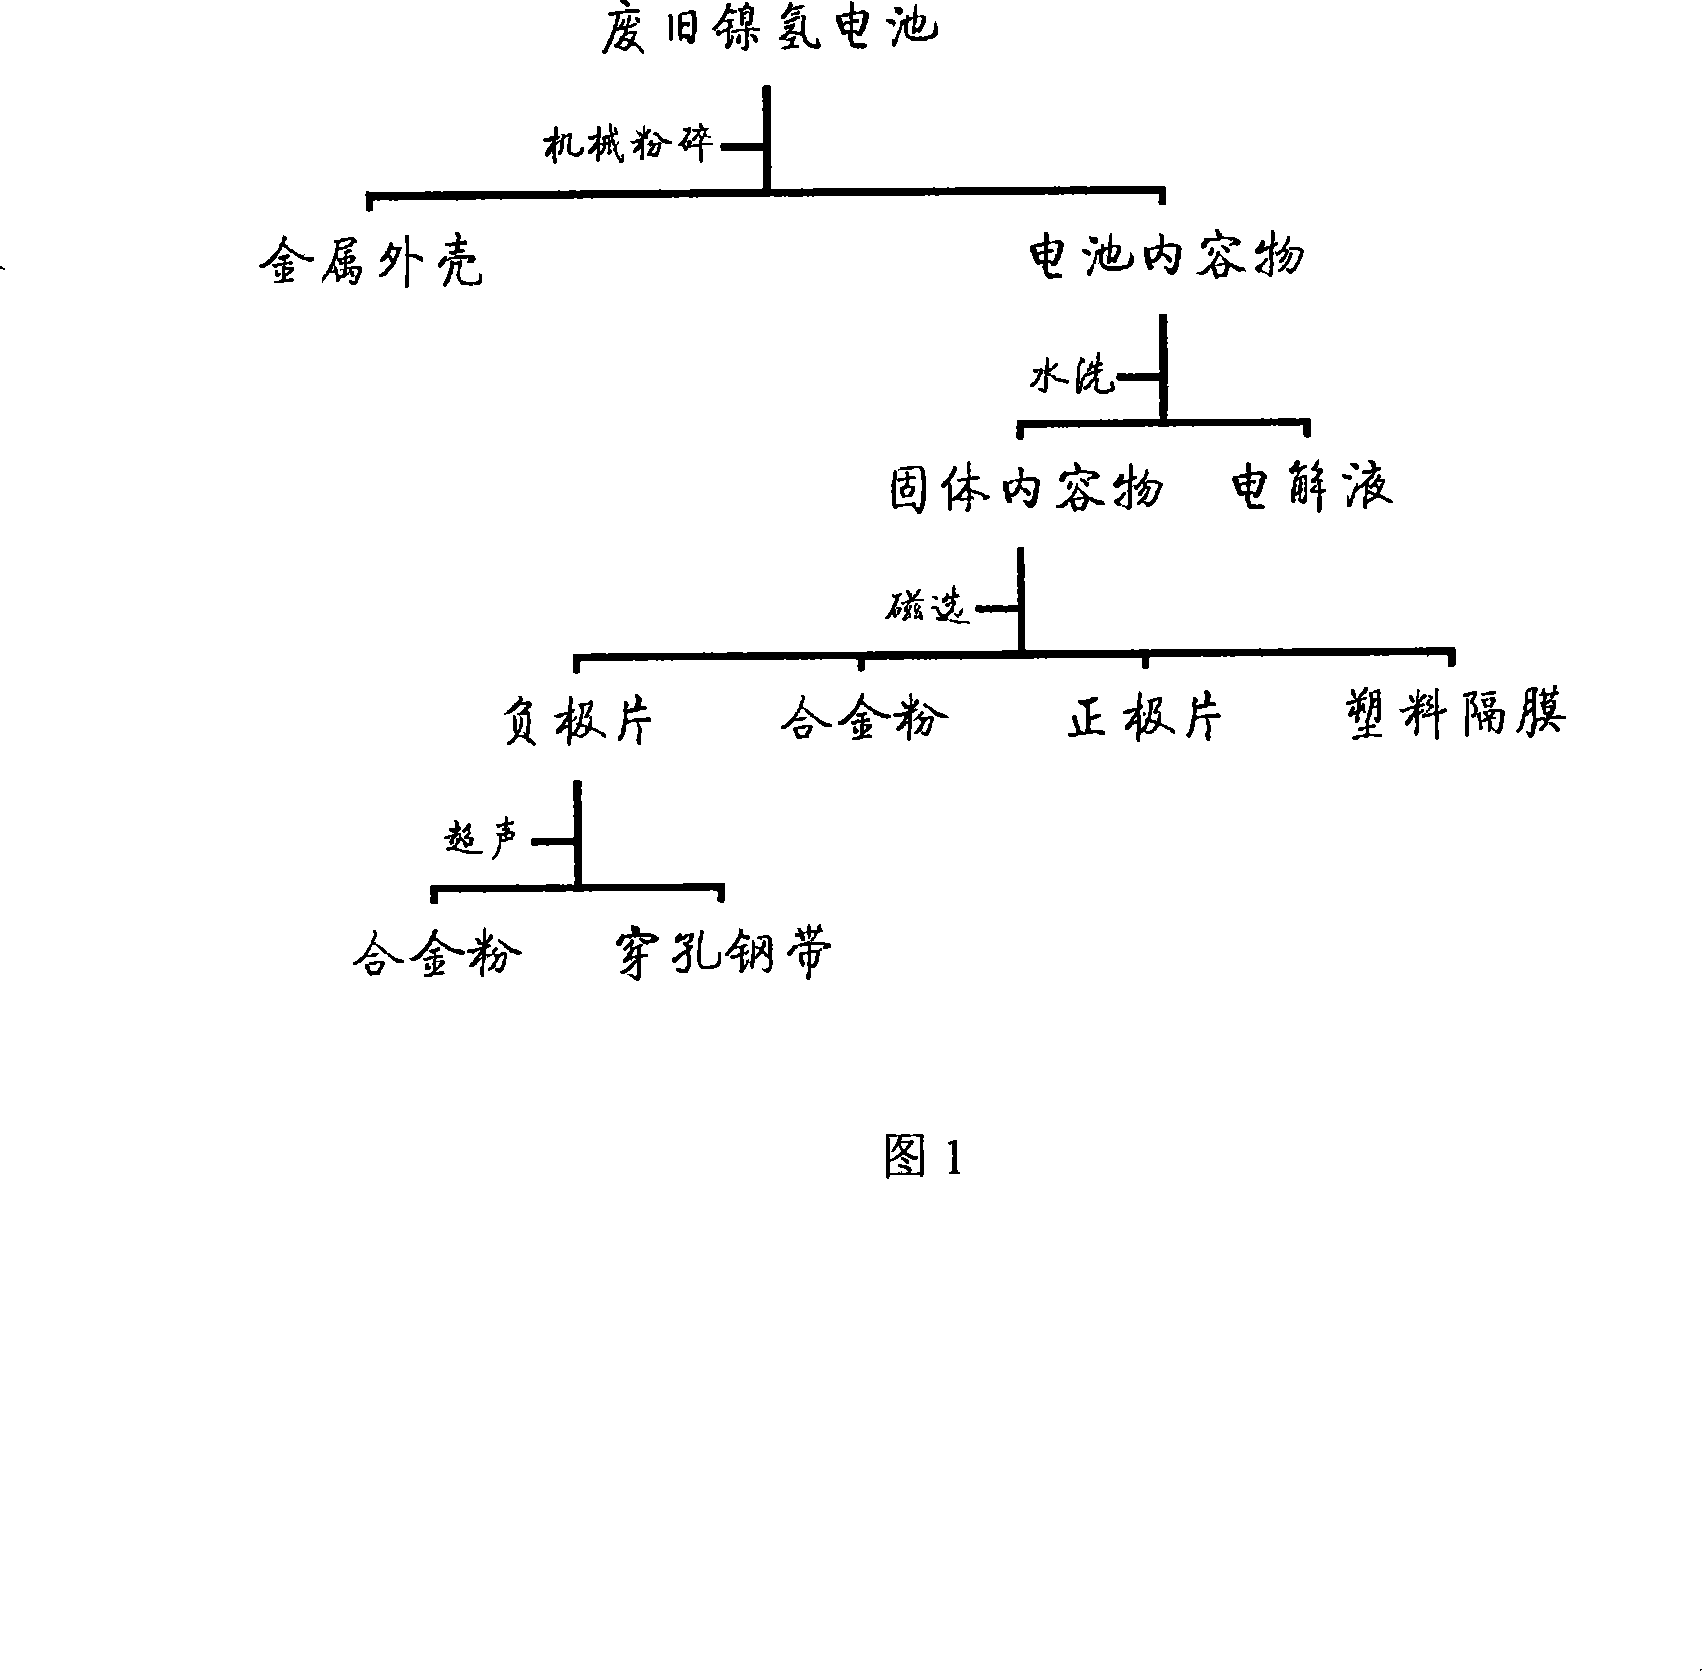 Resource separation and recycling production method for waste nickel hydrogen battery content